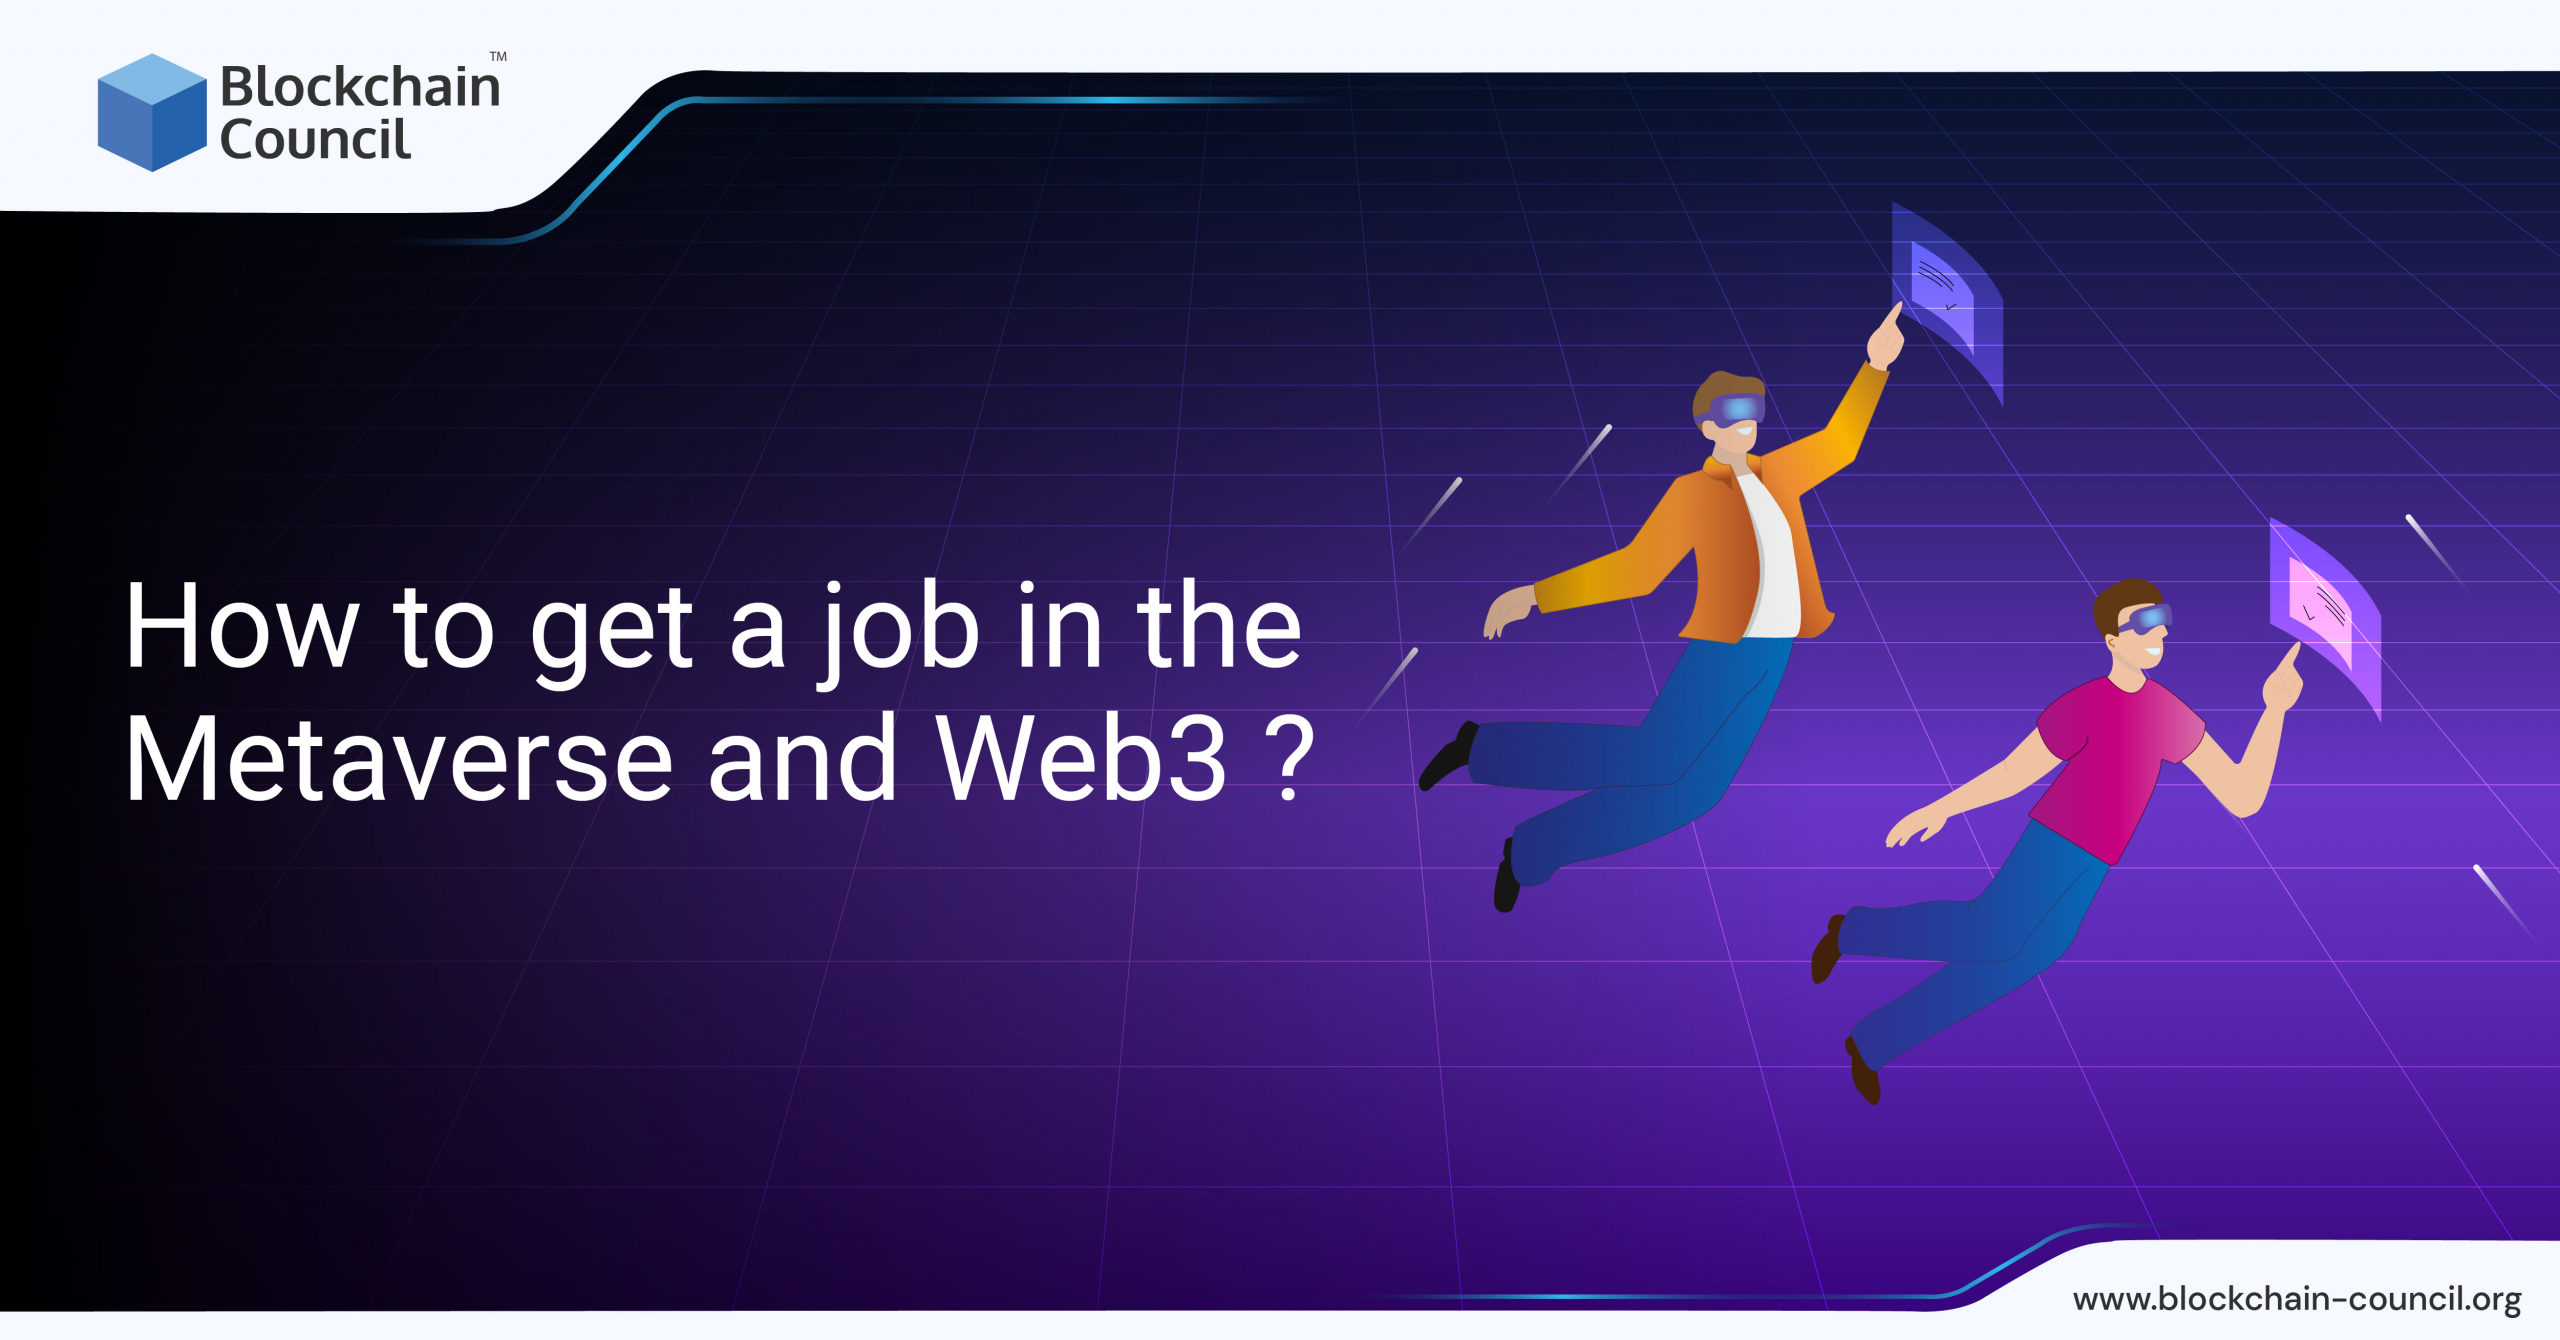 How to get a job in the Metaverse and Web3?